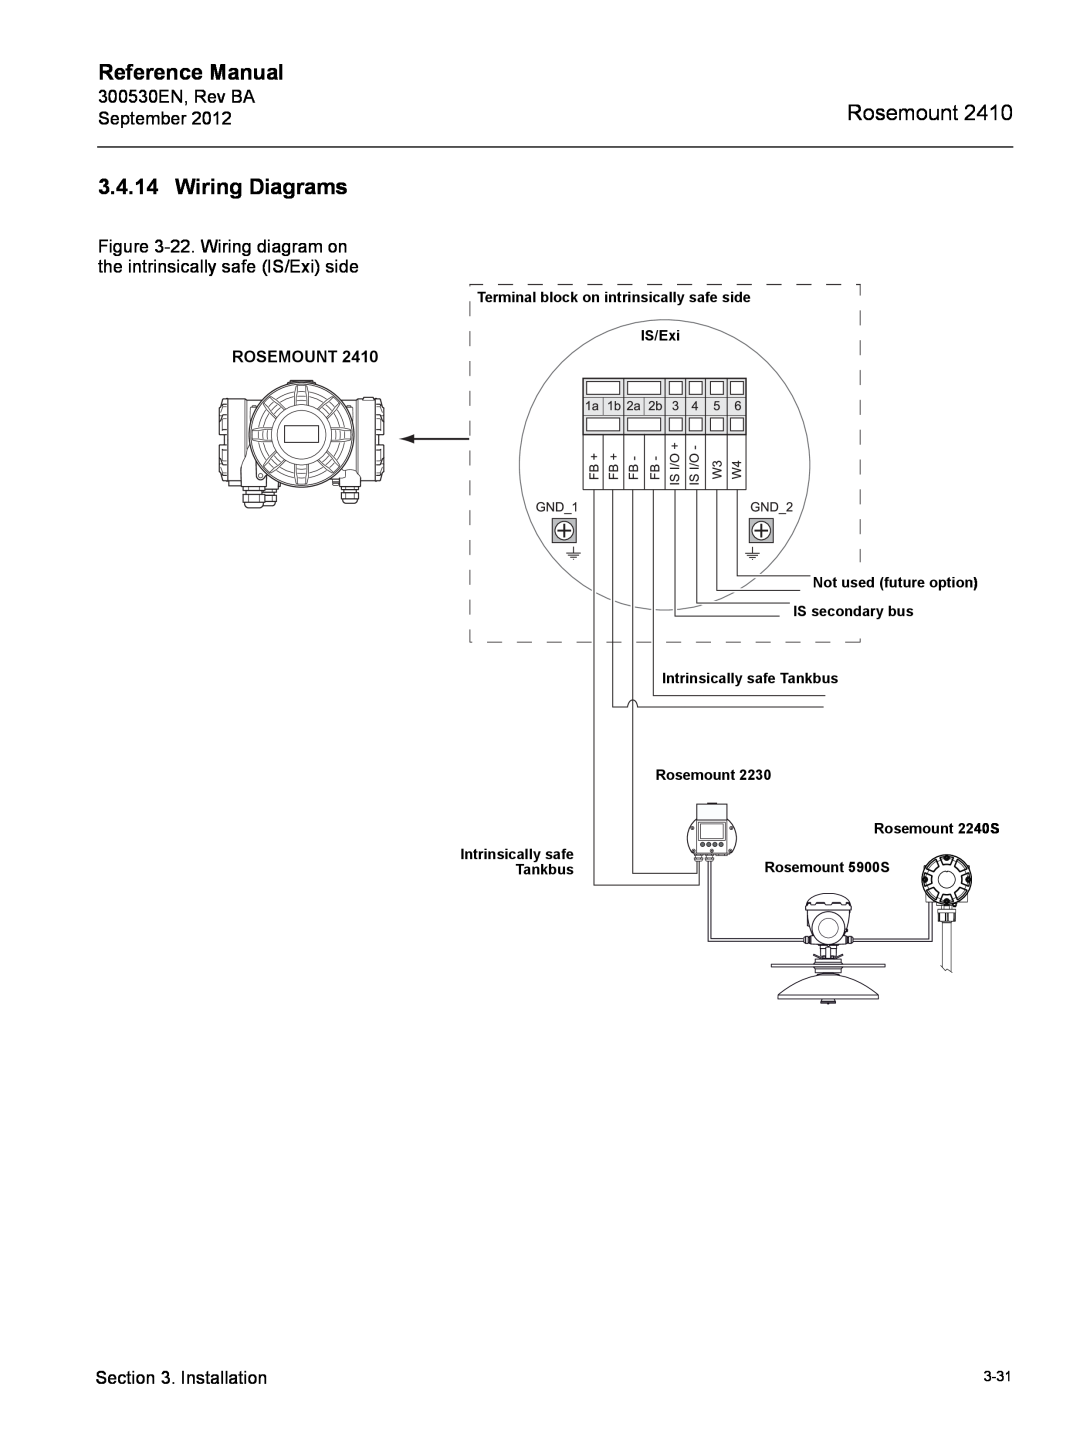 Emerson Process Management Rosemount 2410 Wiring Diagrams, Reference Manual, Terminal block on intrinsically safe side 